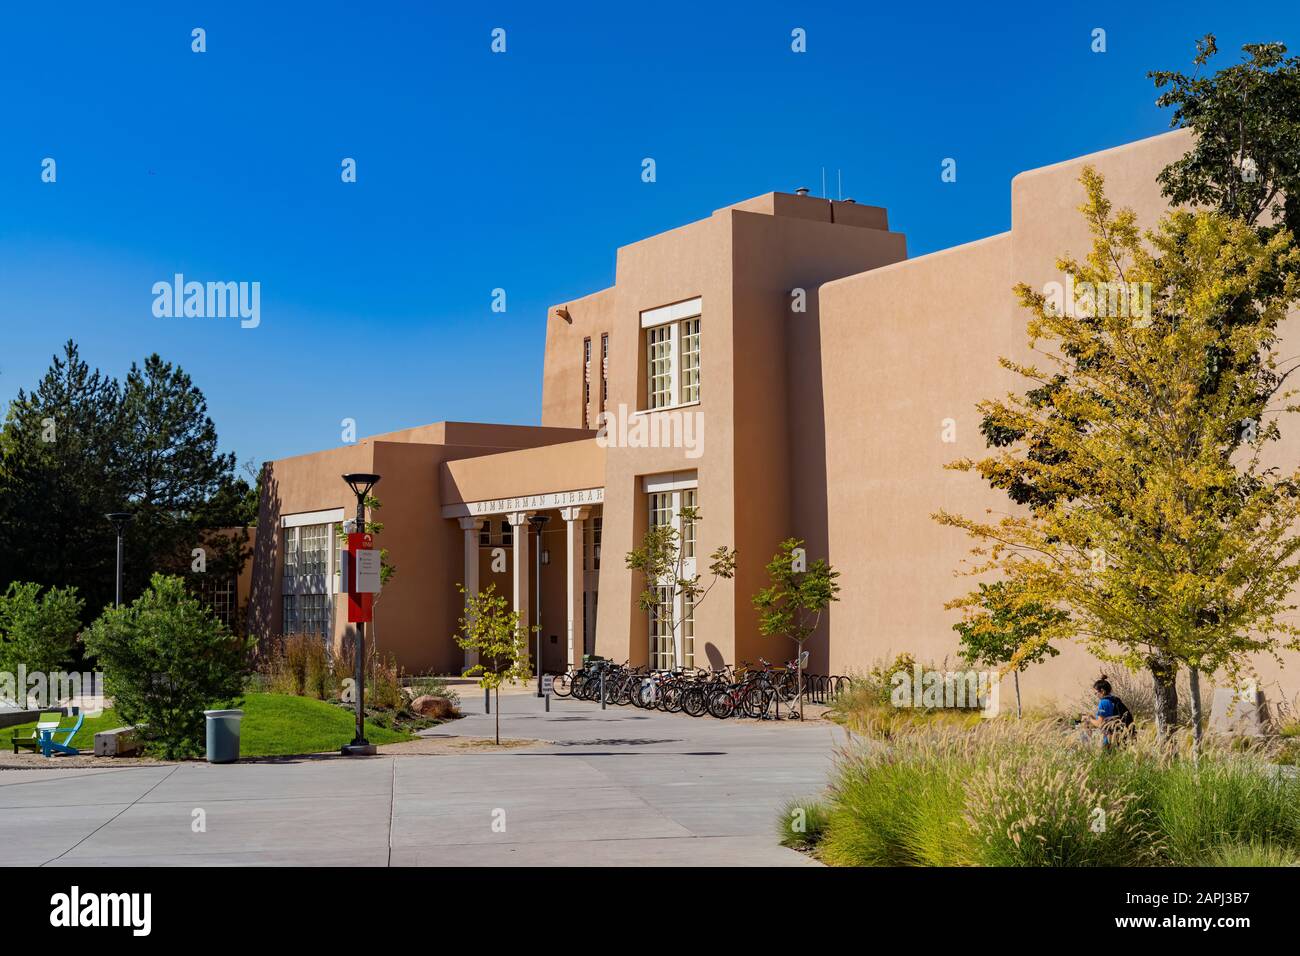 Albuquerque, OCT 7: Zimmerman Library of the beautiful campus of The University of New Mexico on OCT 7, 2019 at Albuquerque Stock Photo